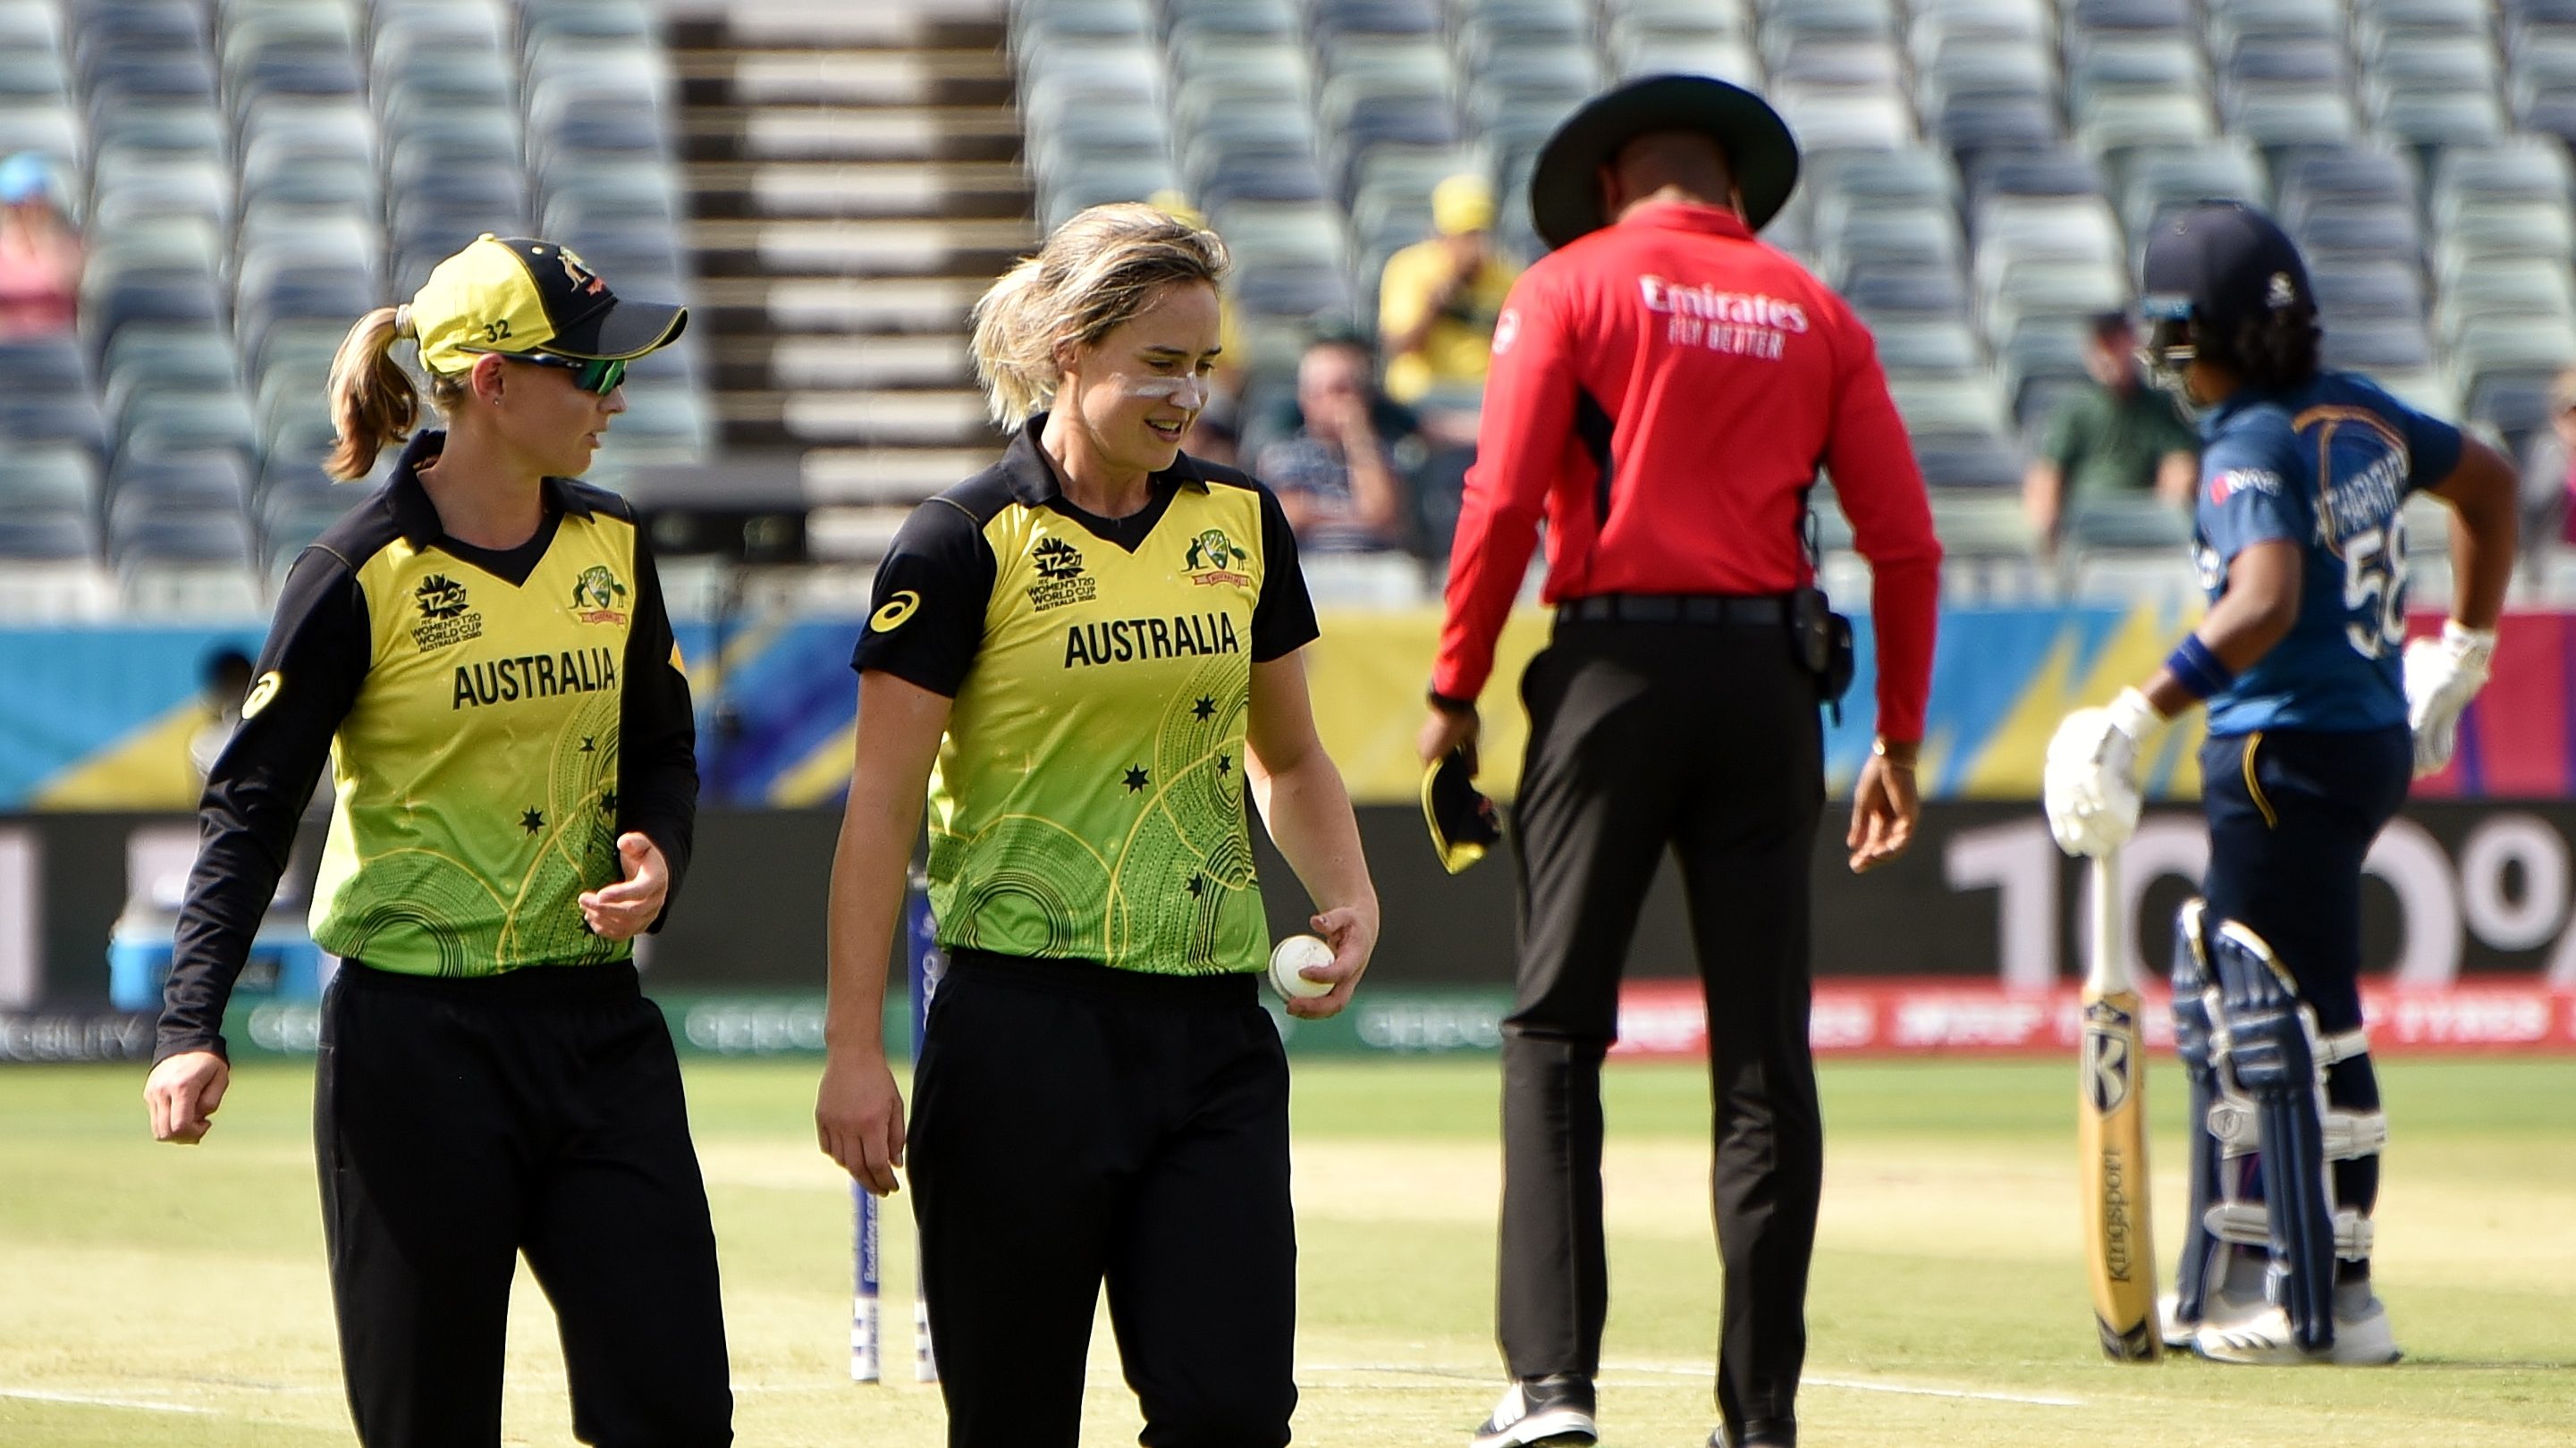 #Controversy Alert: Who Cares About Women’s Cricket Anyway?